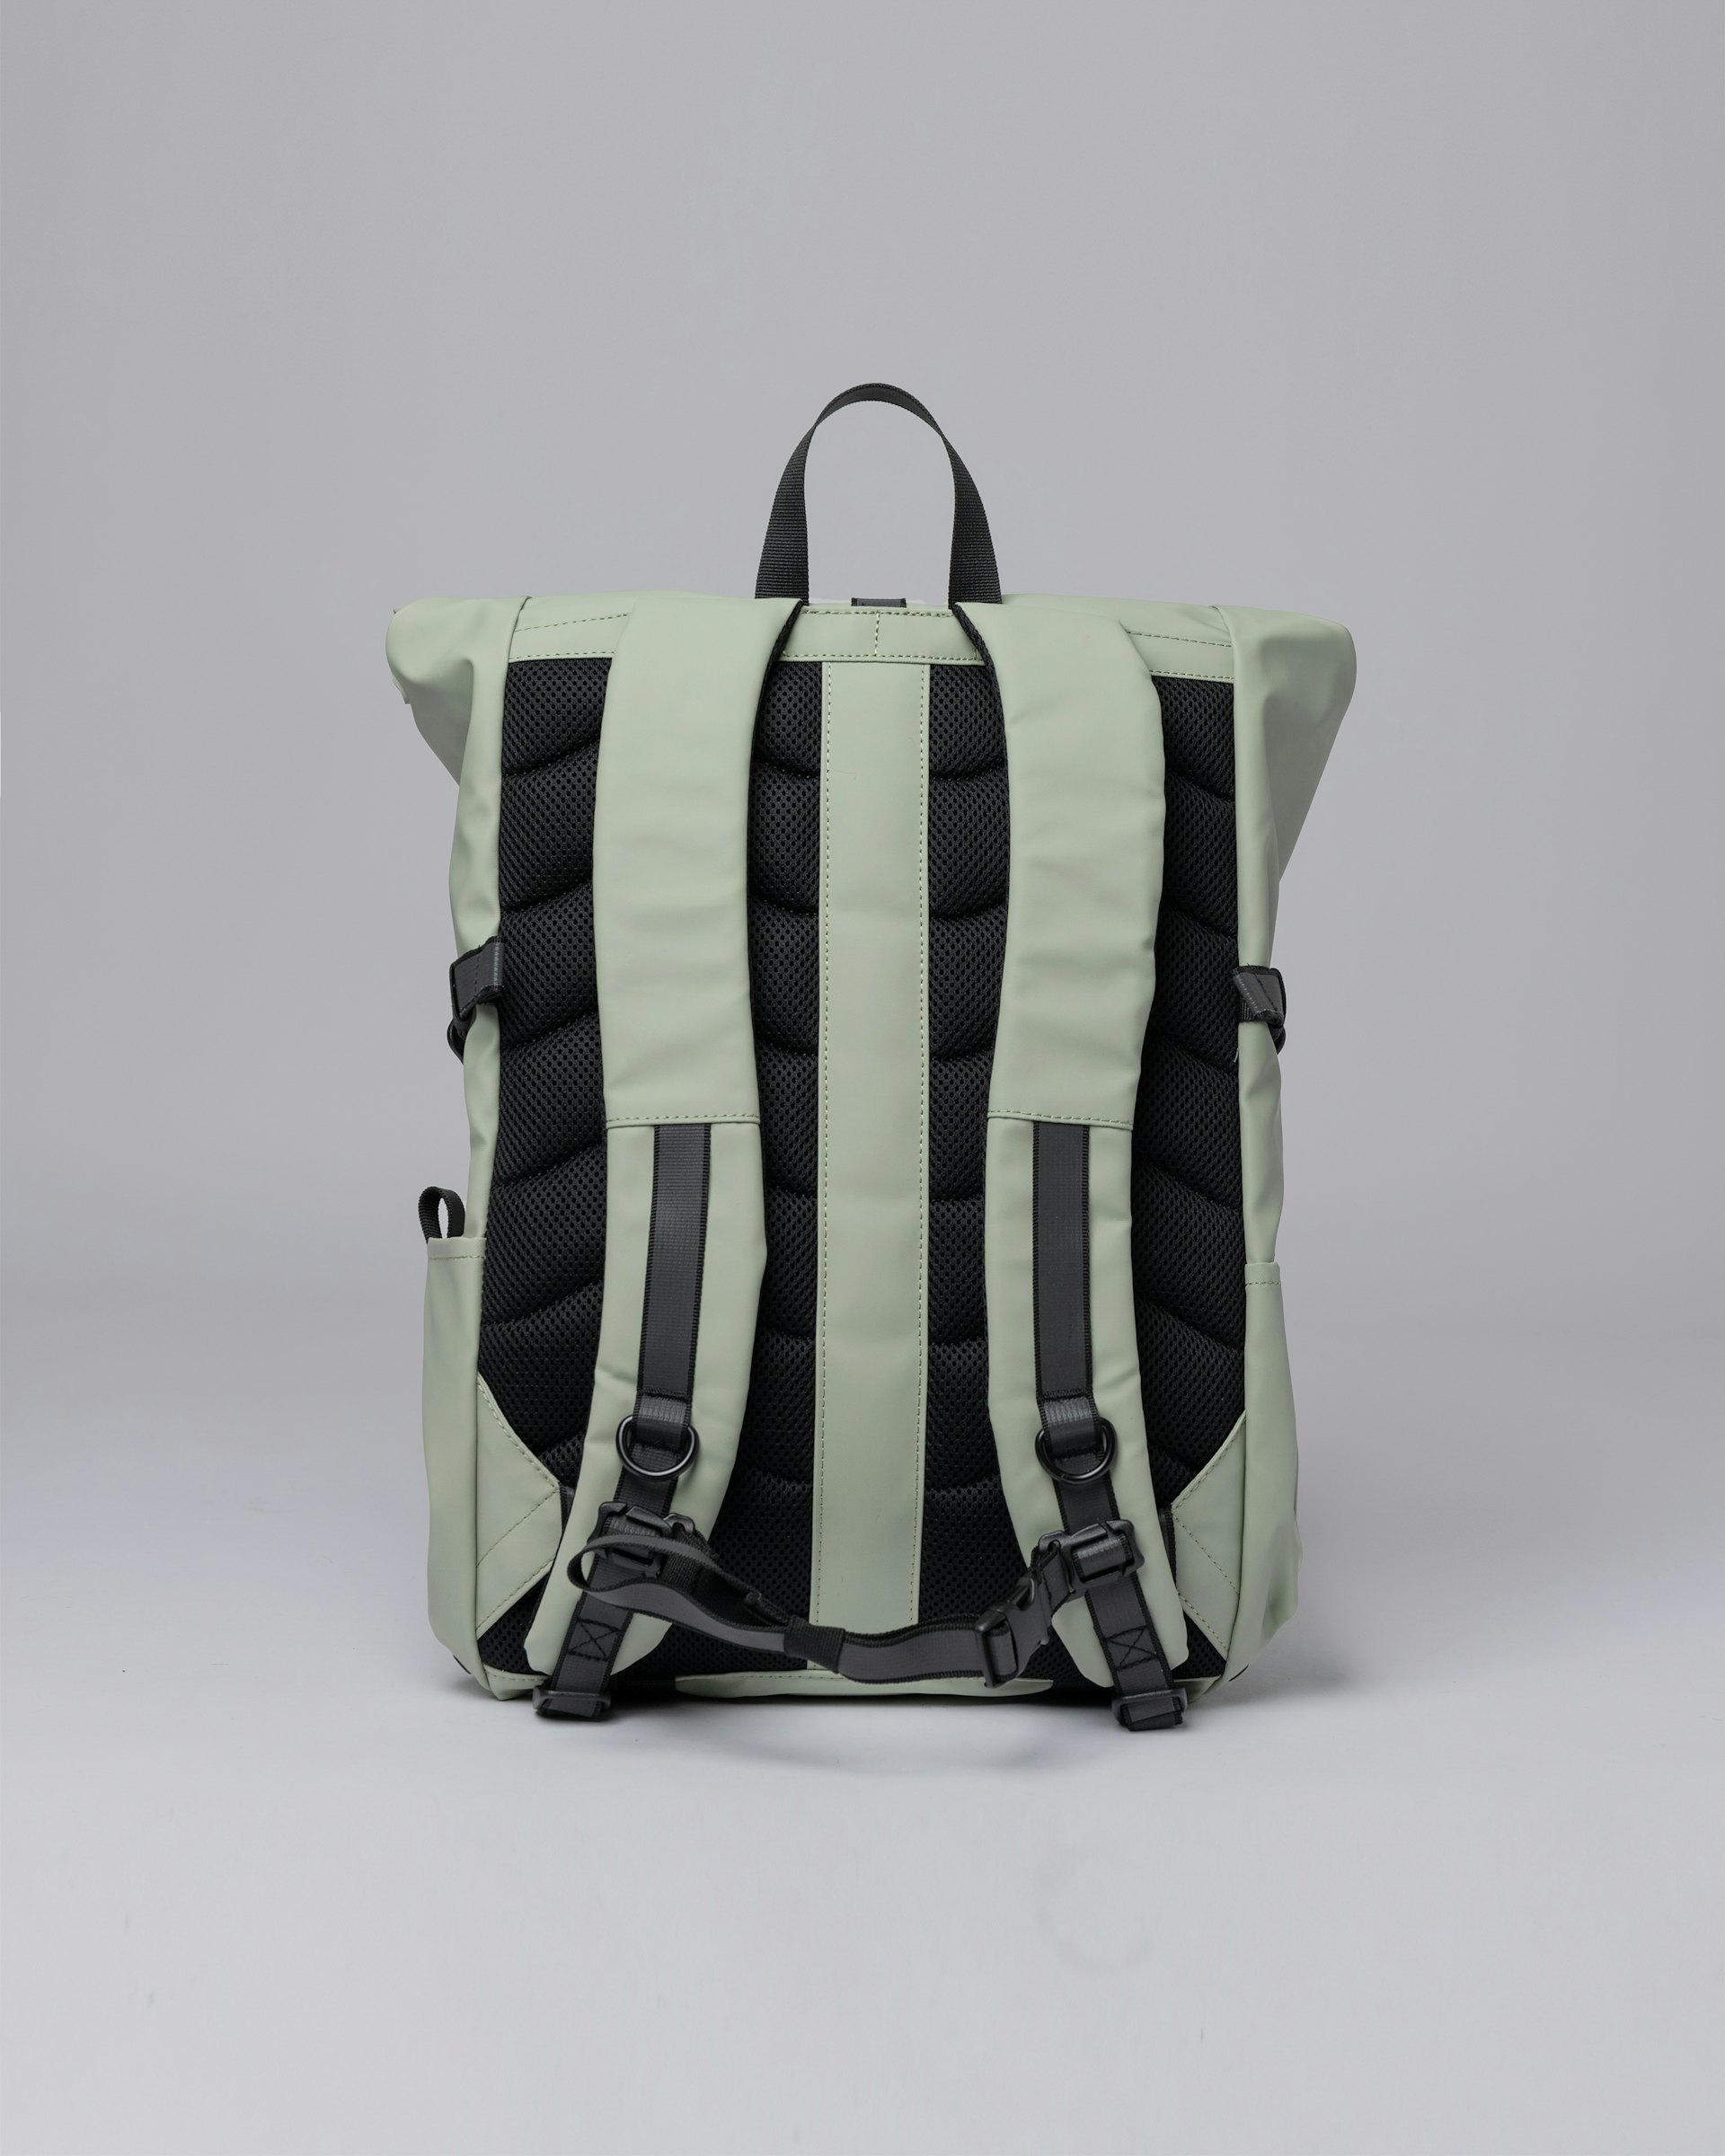 Ruben 2.0 belongs to the category Backpacks and is in color dew green (3 of 5)